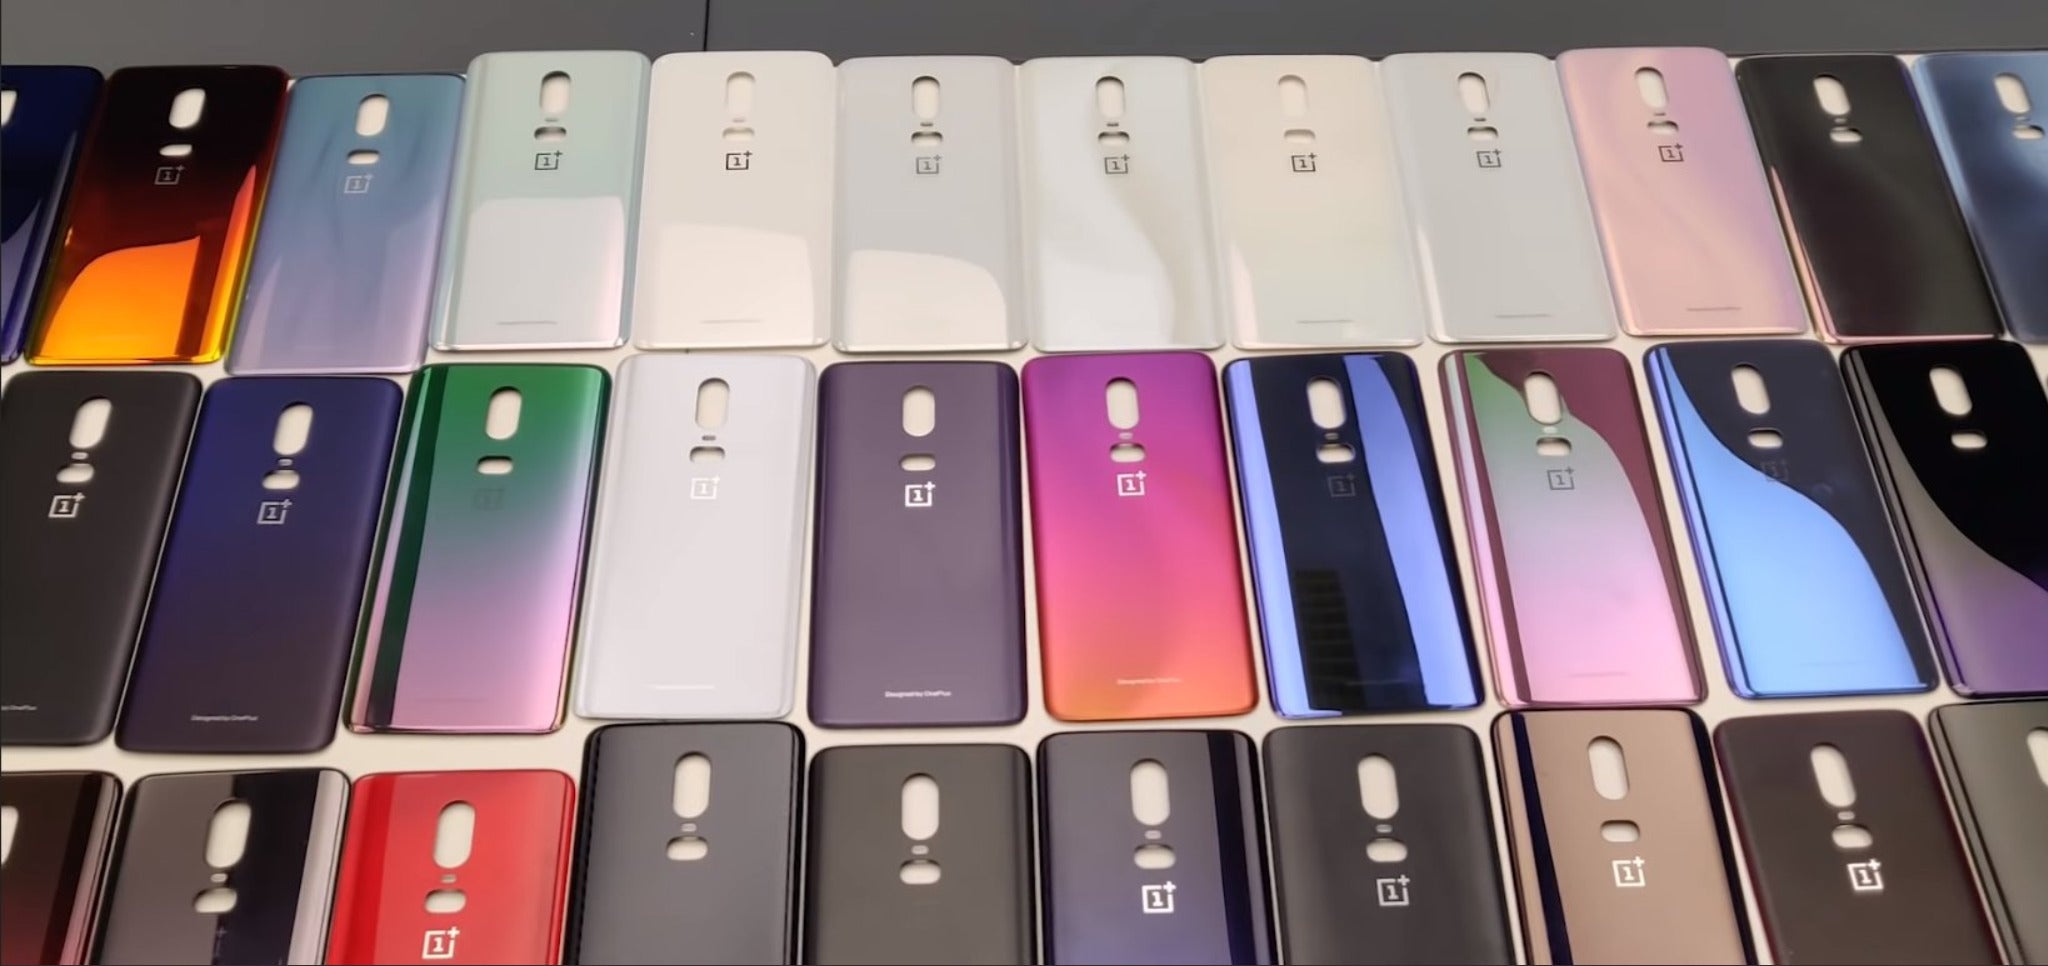 Early OnePlus 6 prototypes revealed on video: some did not have a headphone jack